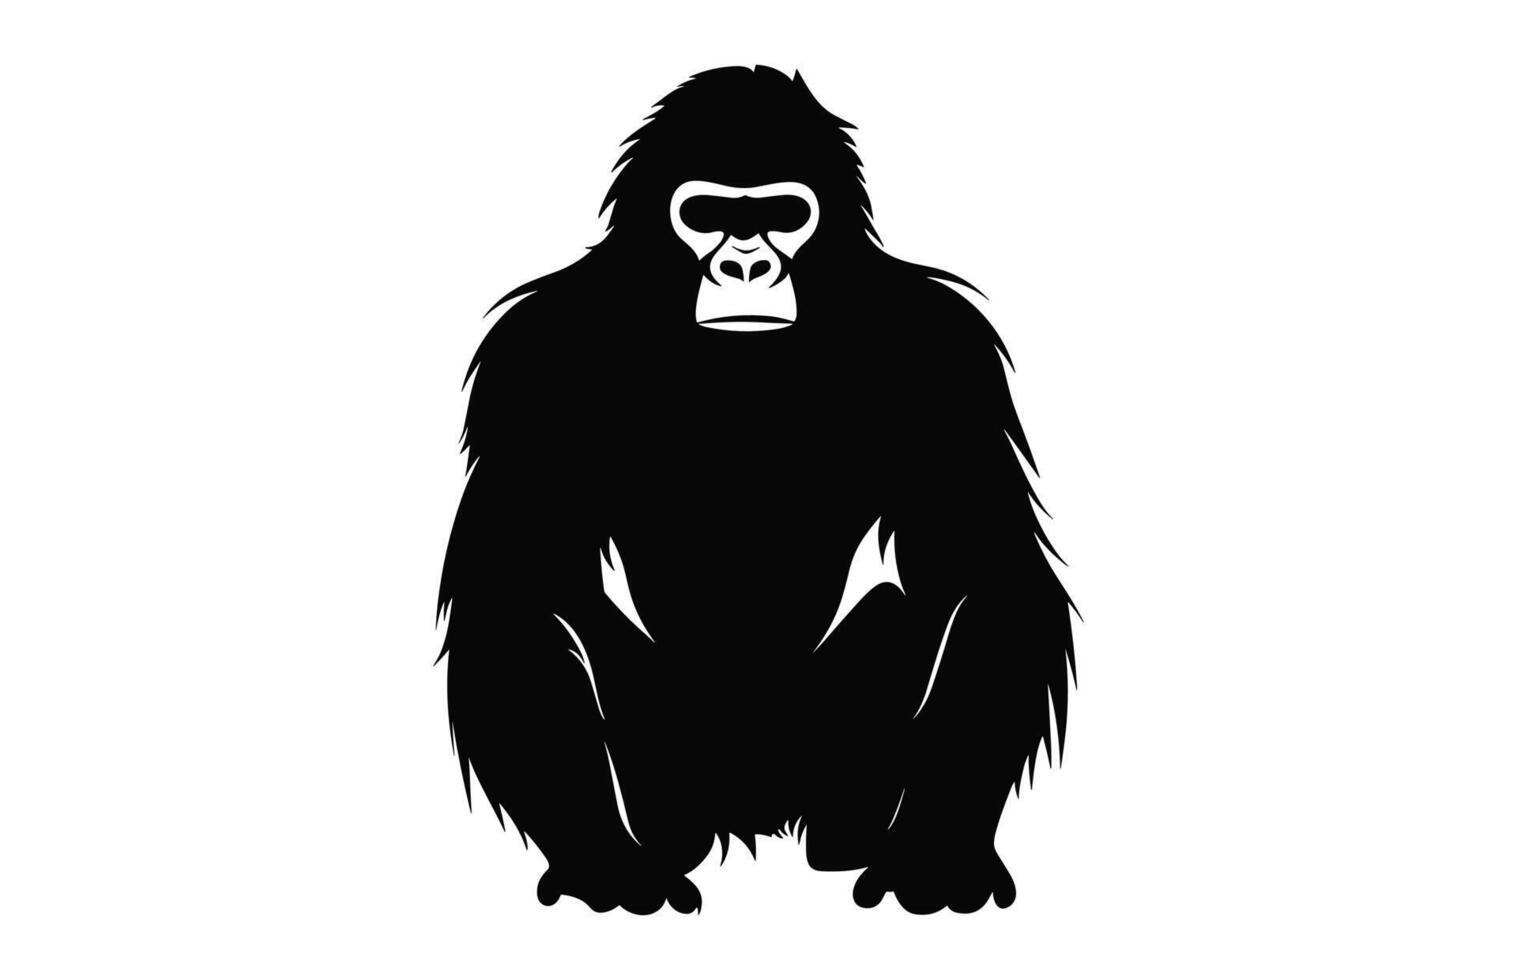 Ape black silhouette isolated on a white background, A Chimpanzee ape vector clipart